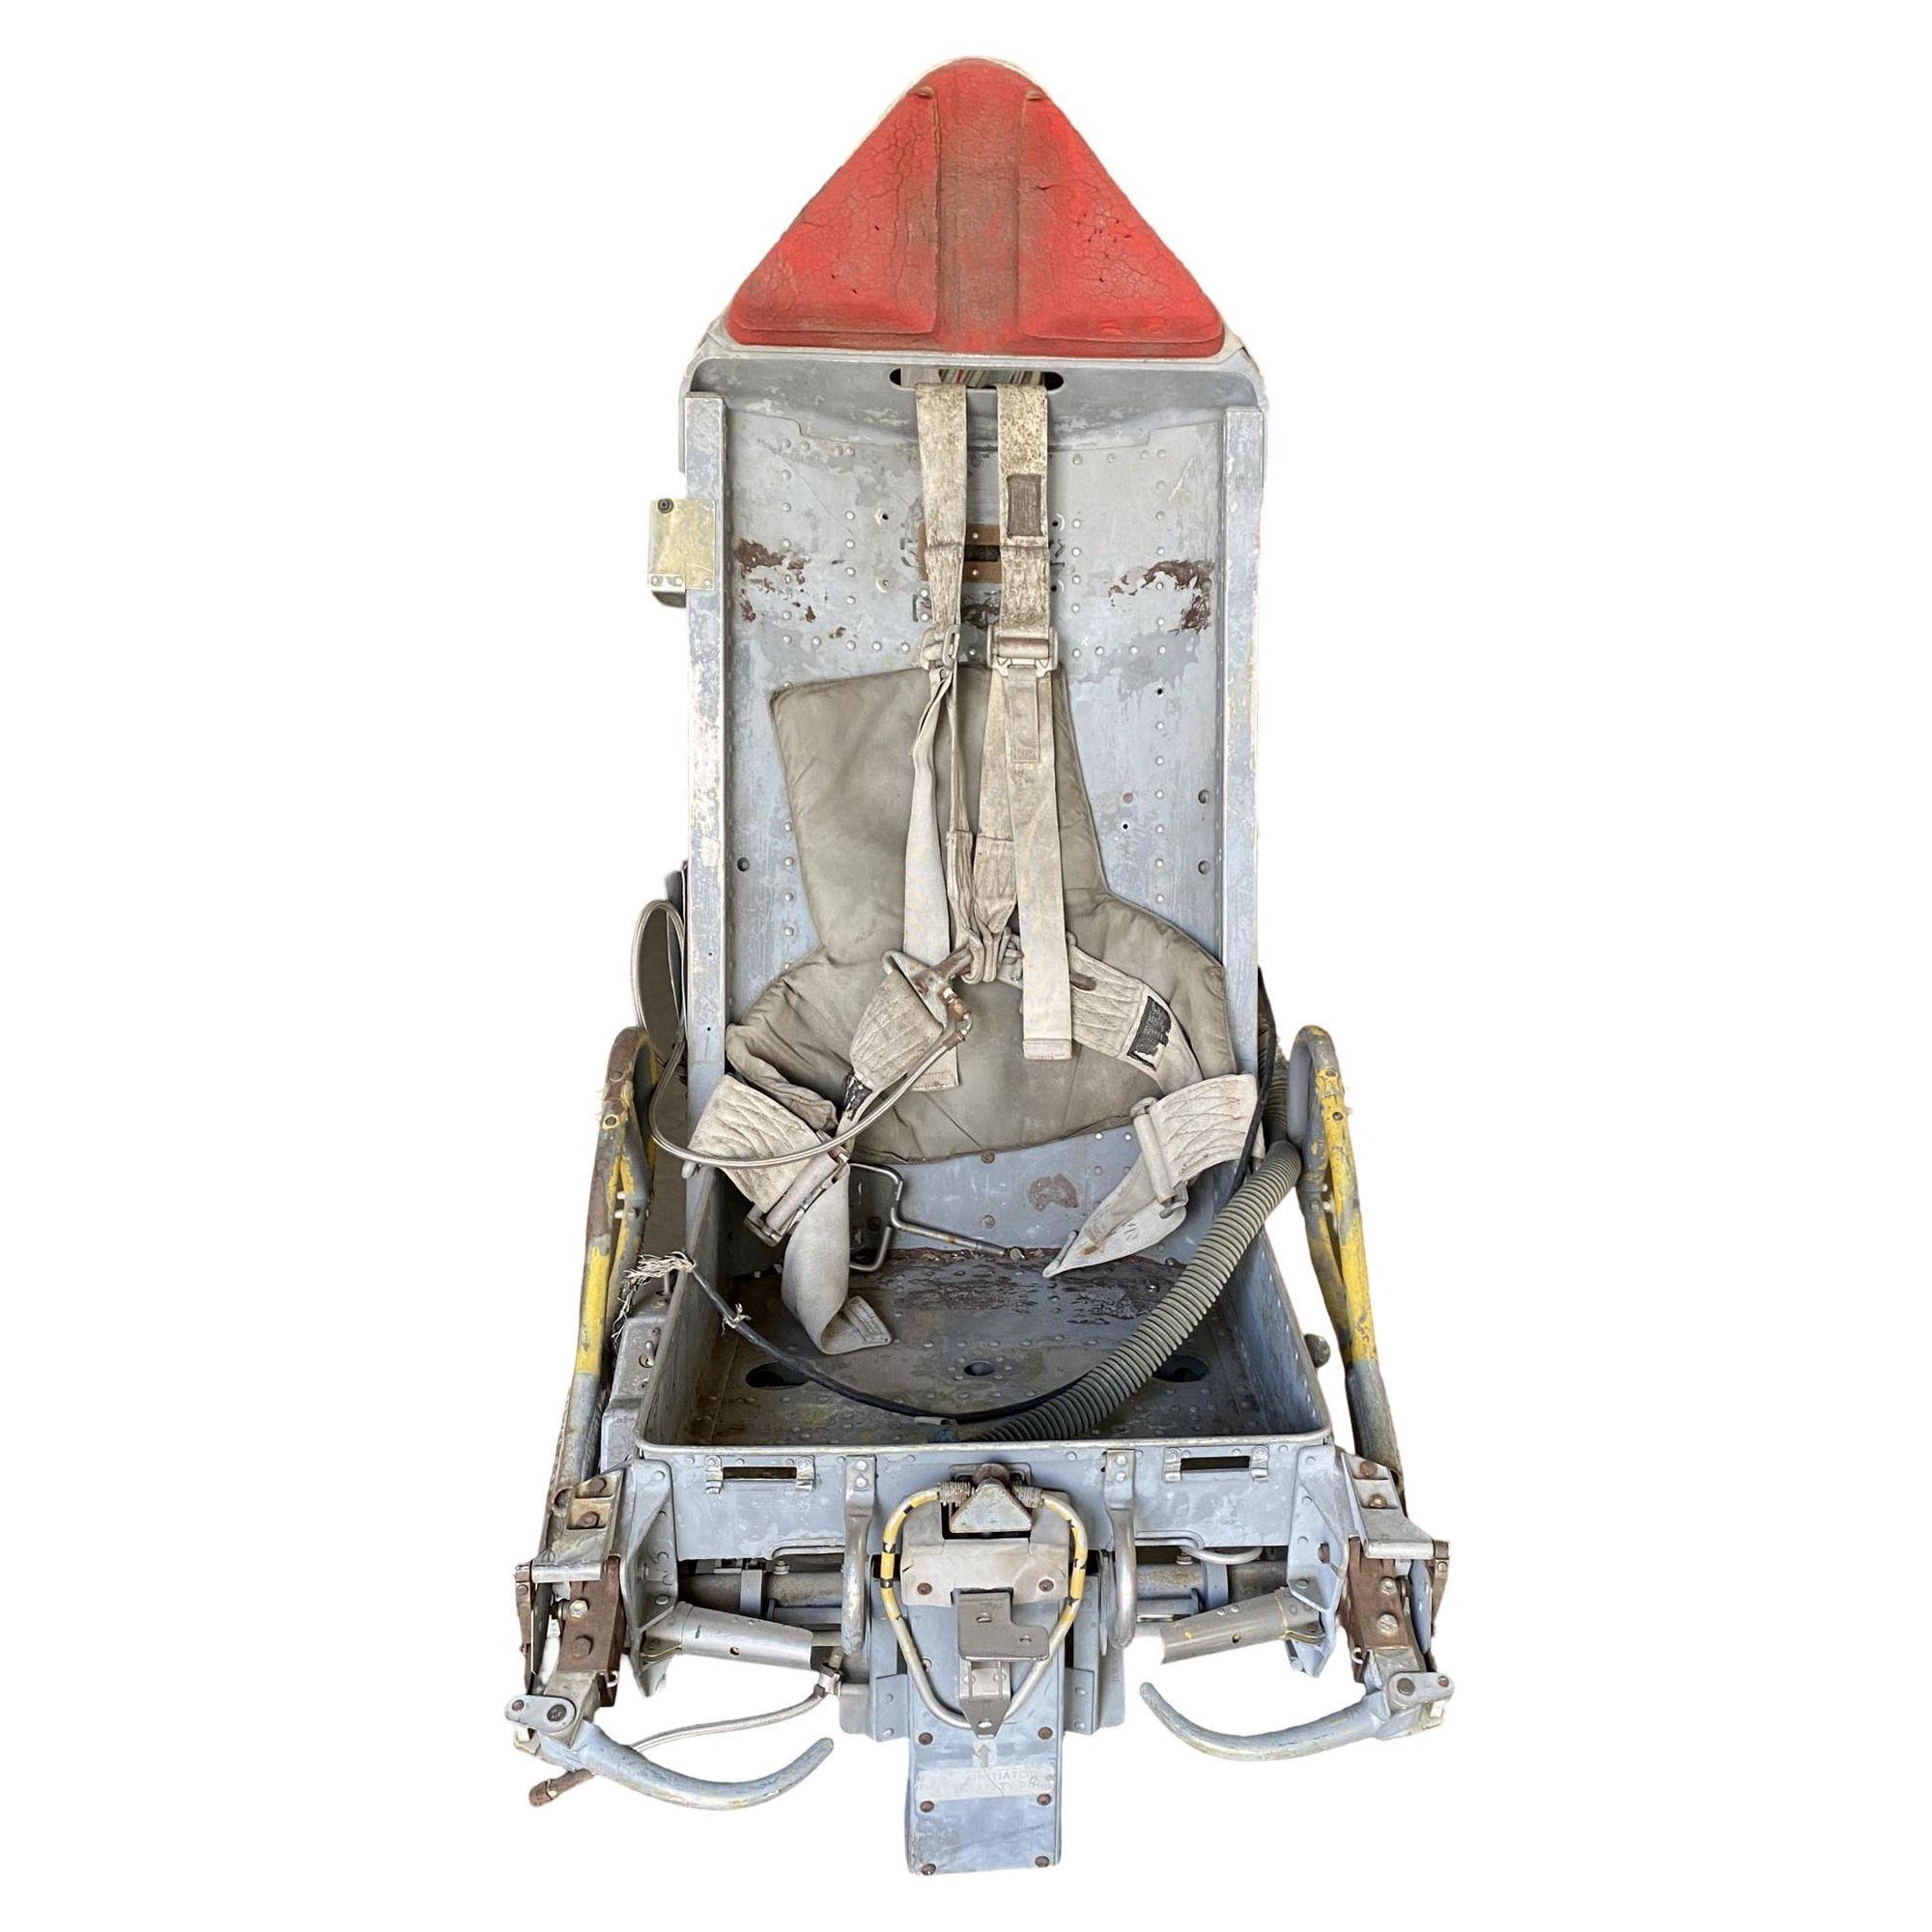 b52 ejection seat